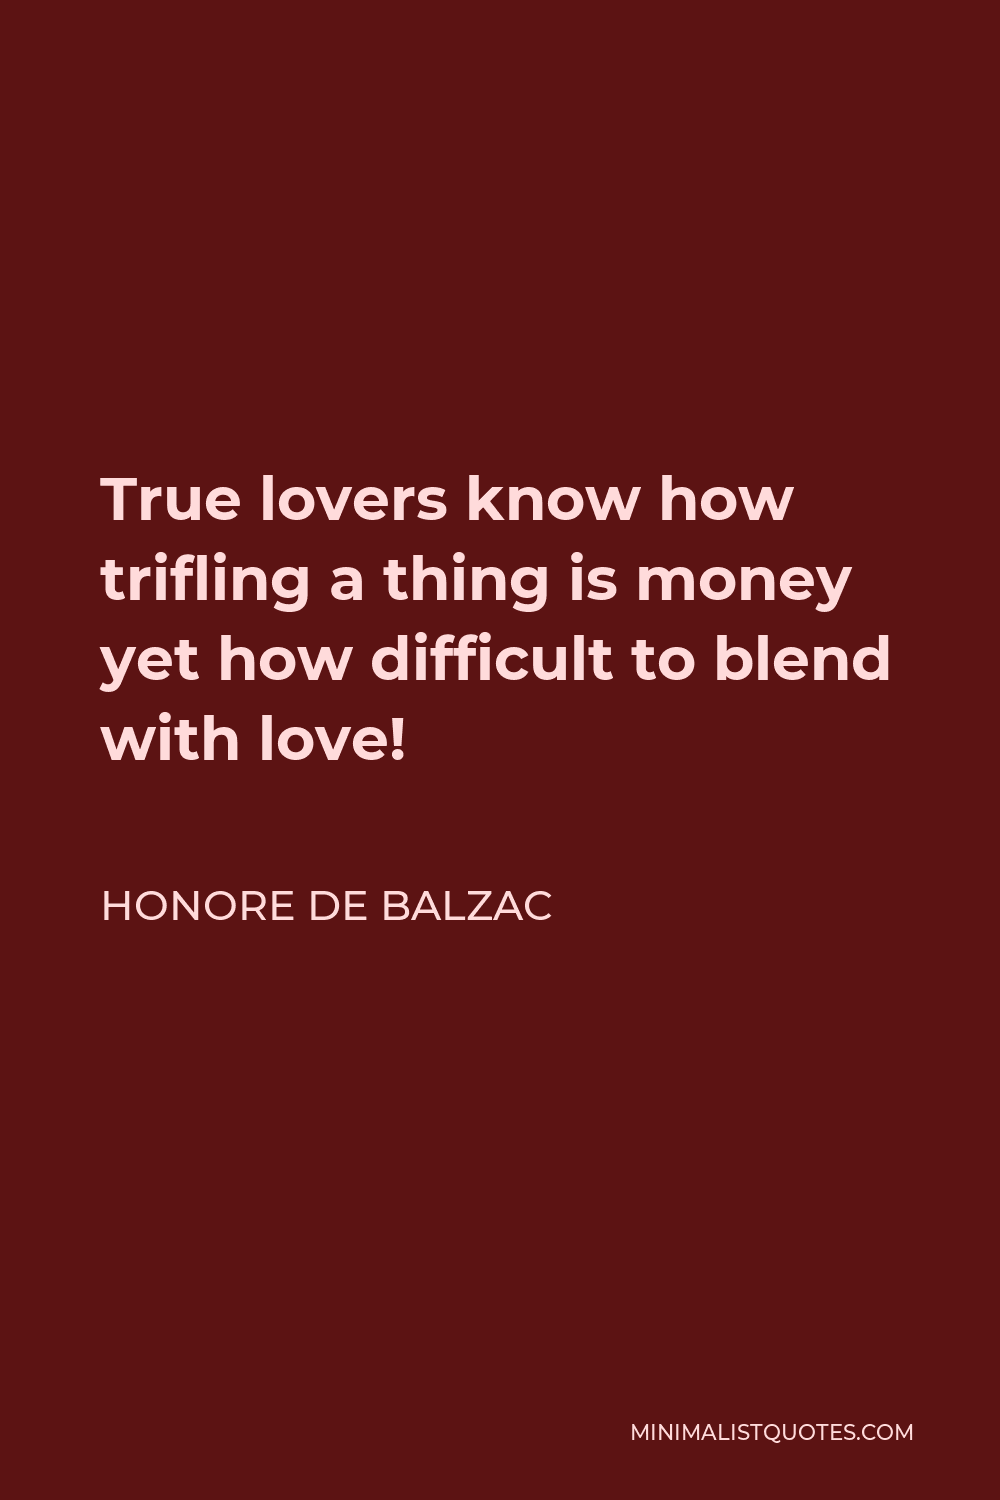 Honore de Balzac Quote - True lovers know how trifling a thing is money yet how difficult to blend with love!